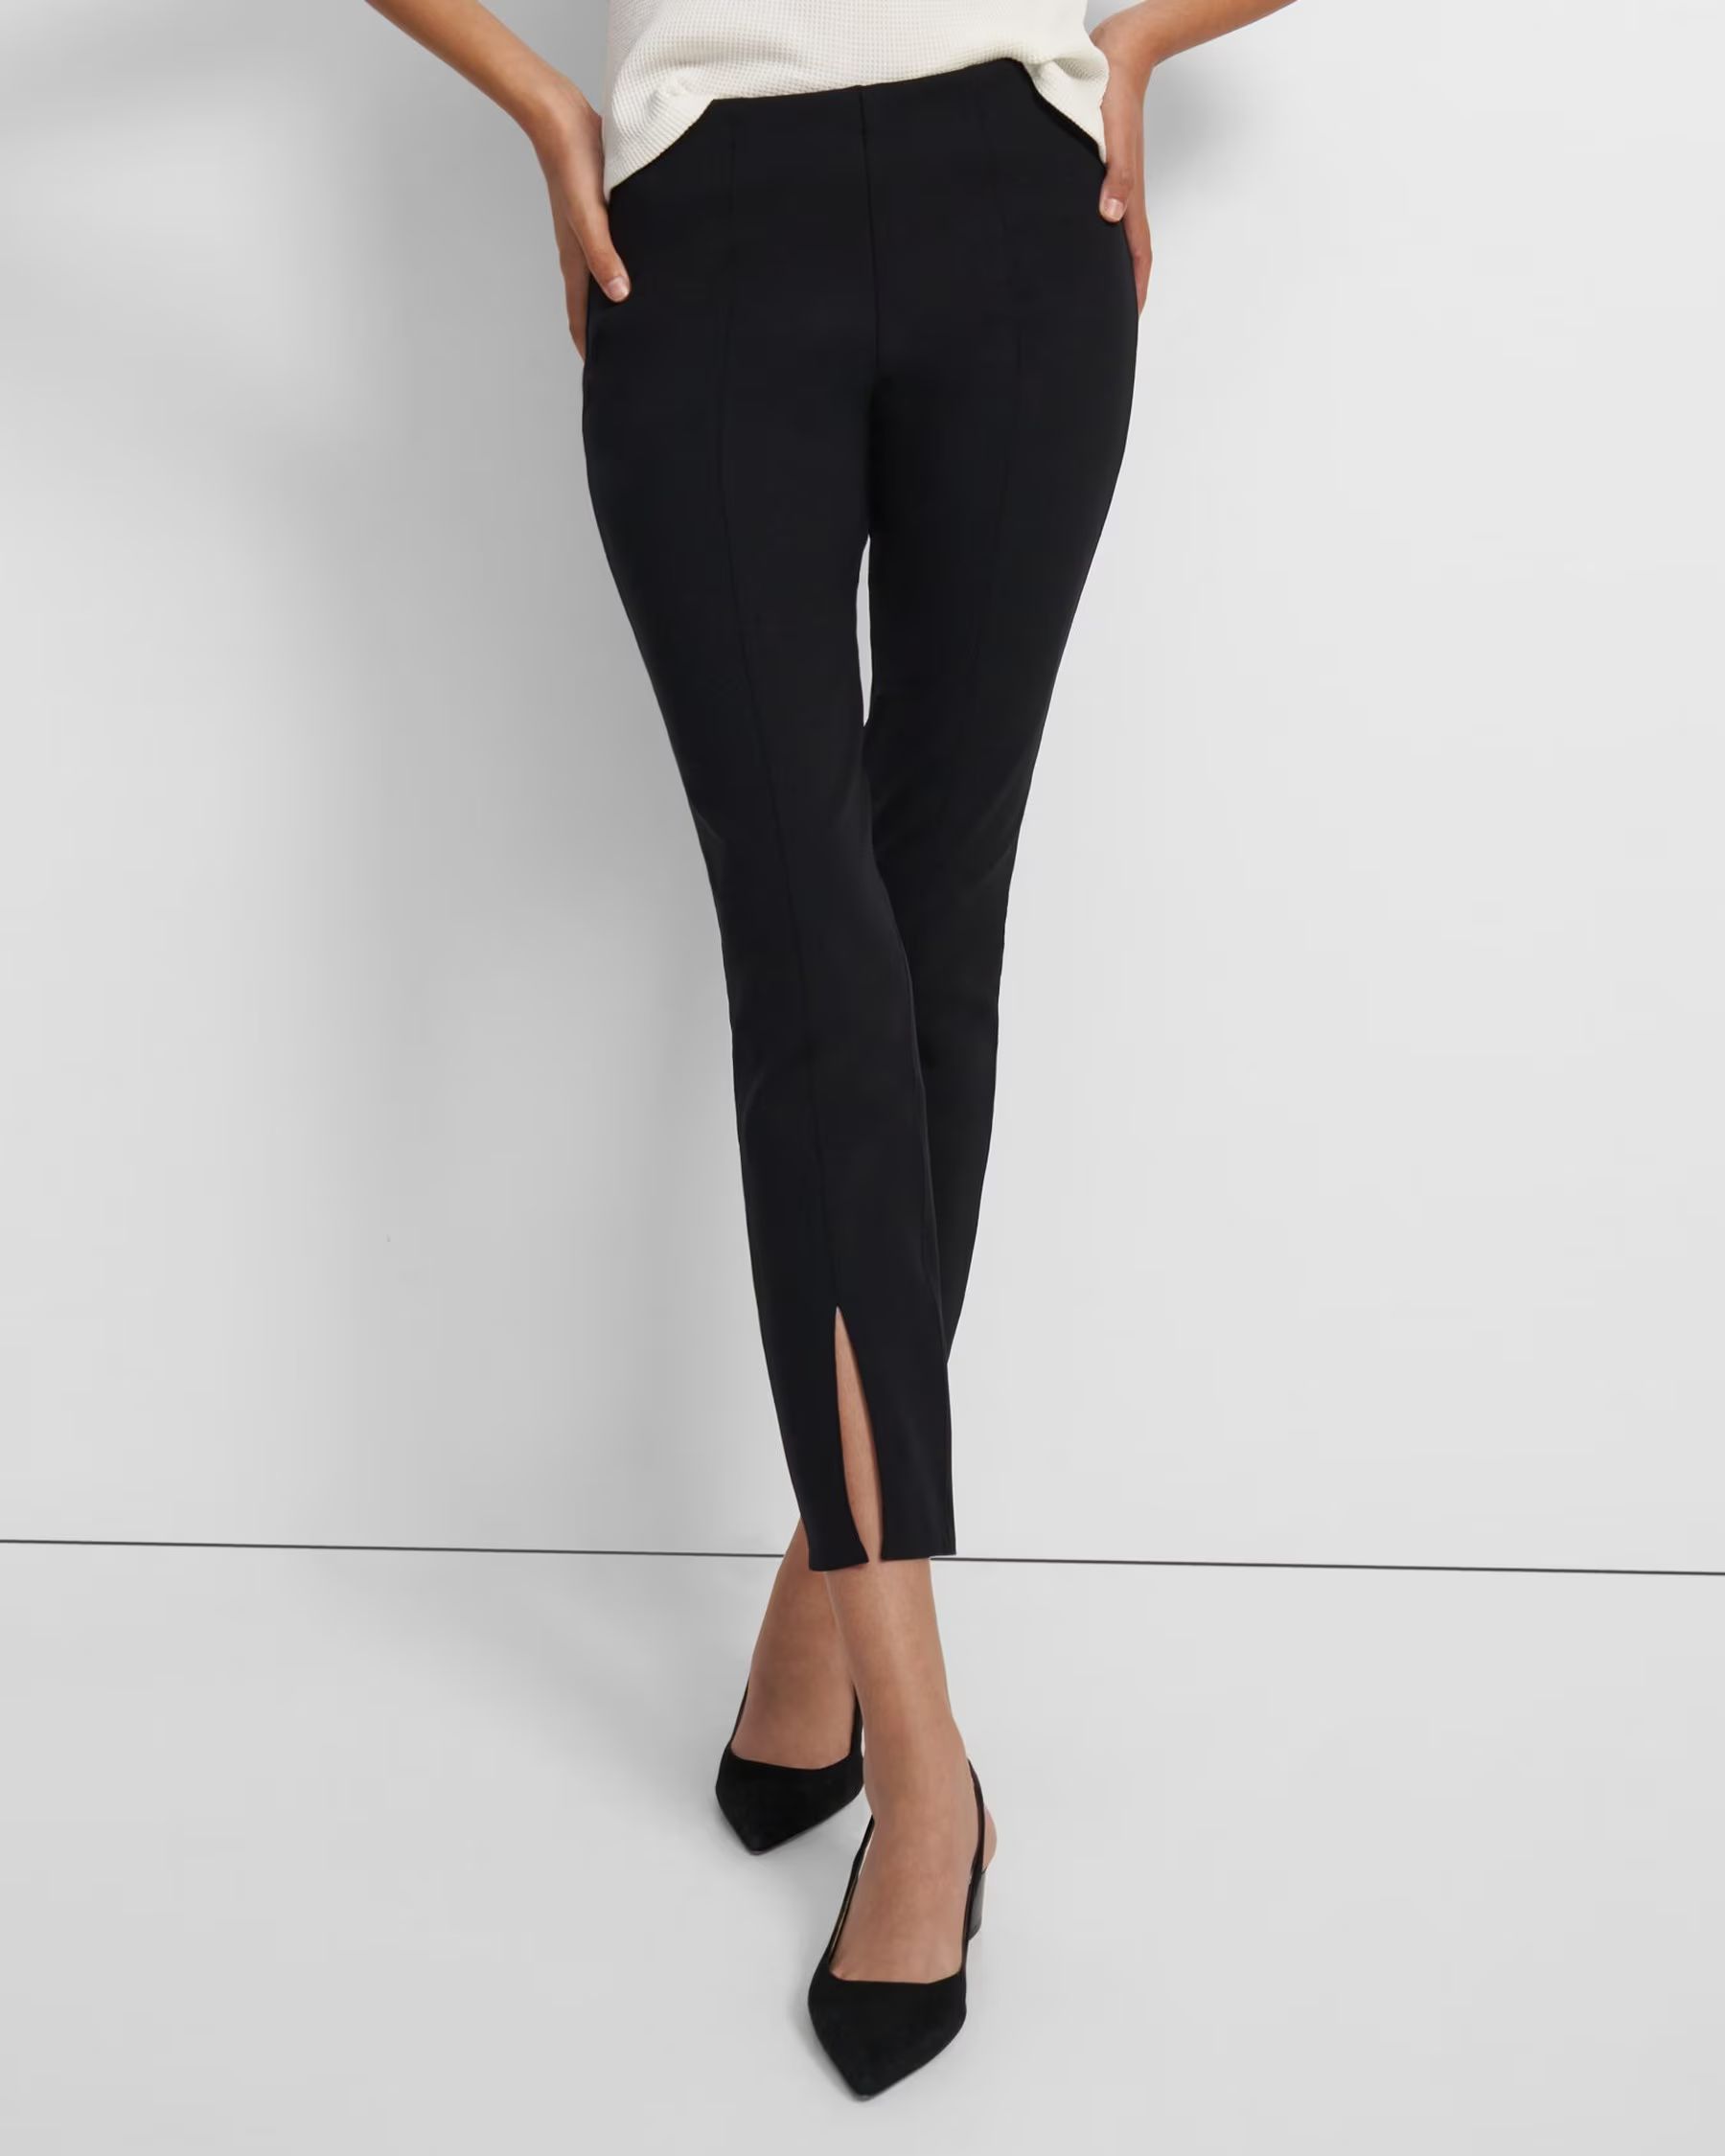 Slit Legging in Scuba | Theory Outlet